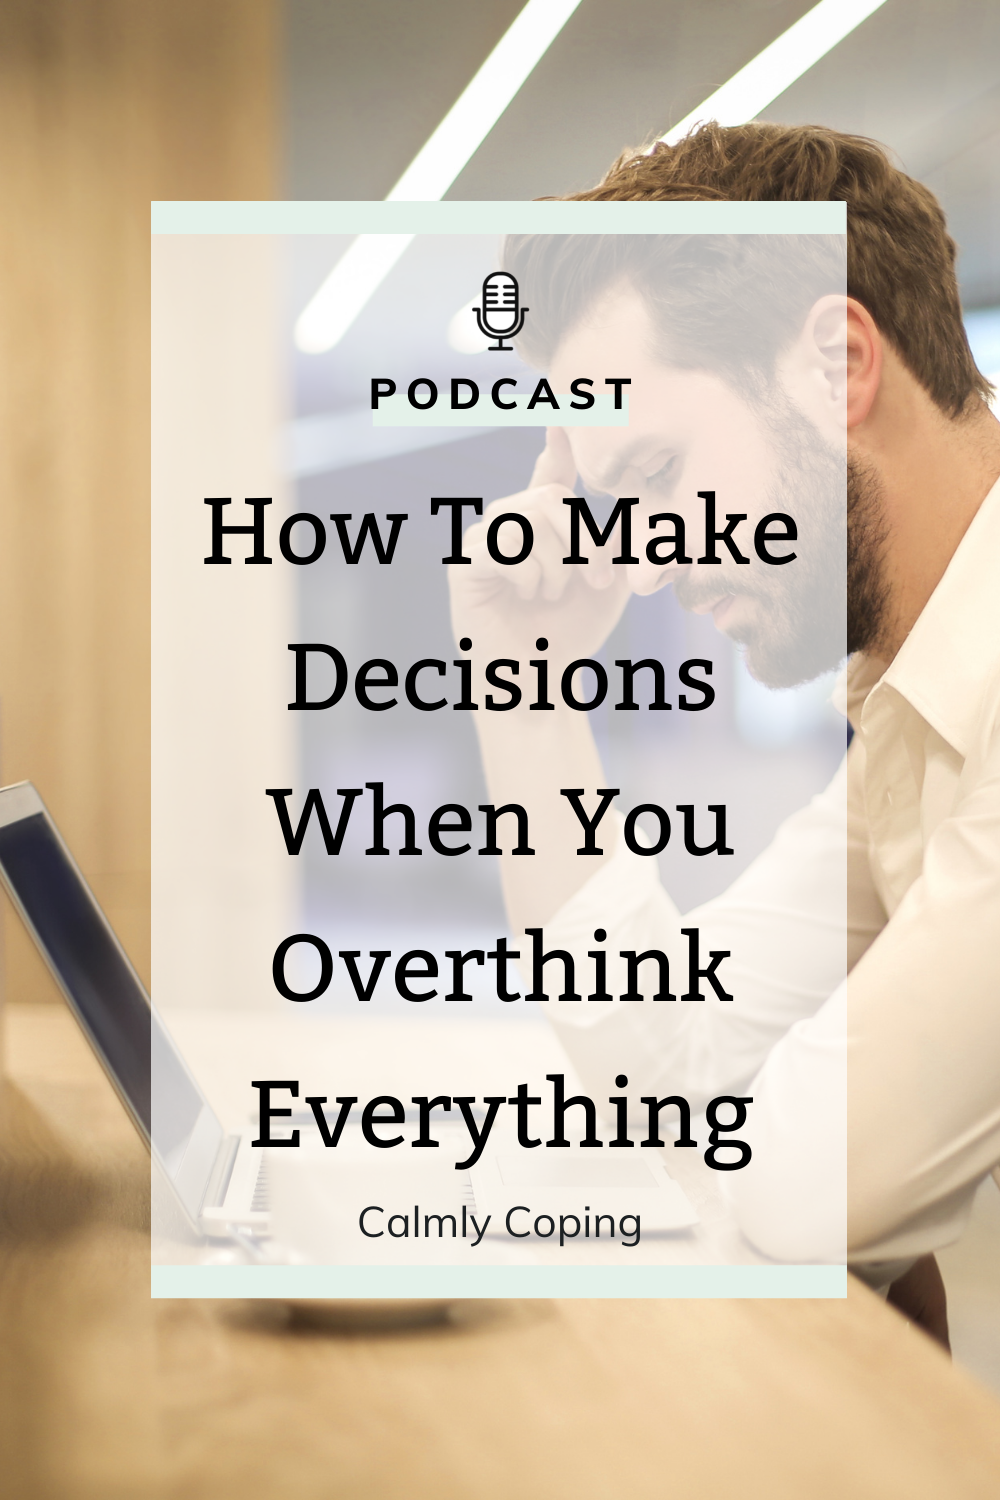 How To Make Decisions When You Overthink Everything